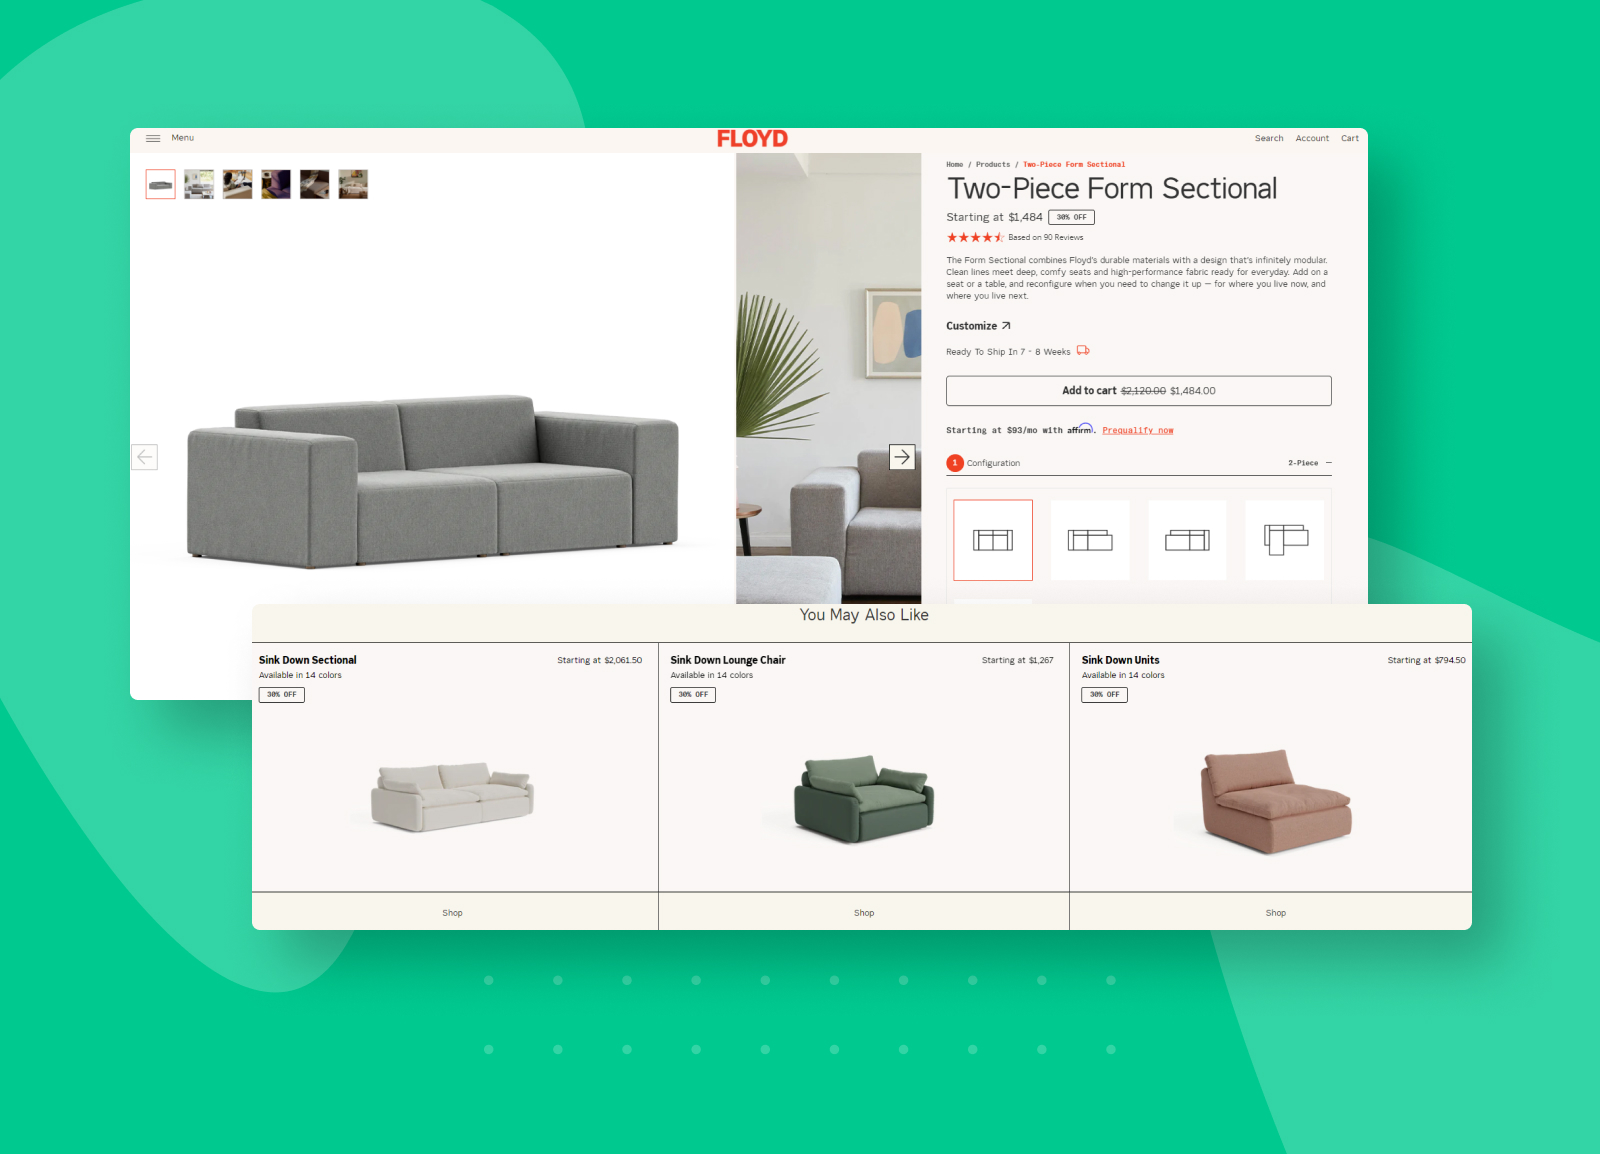 Furniture Marketing real-time personalization